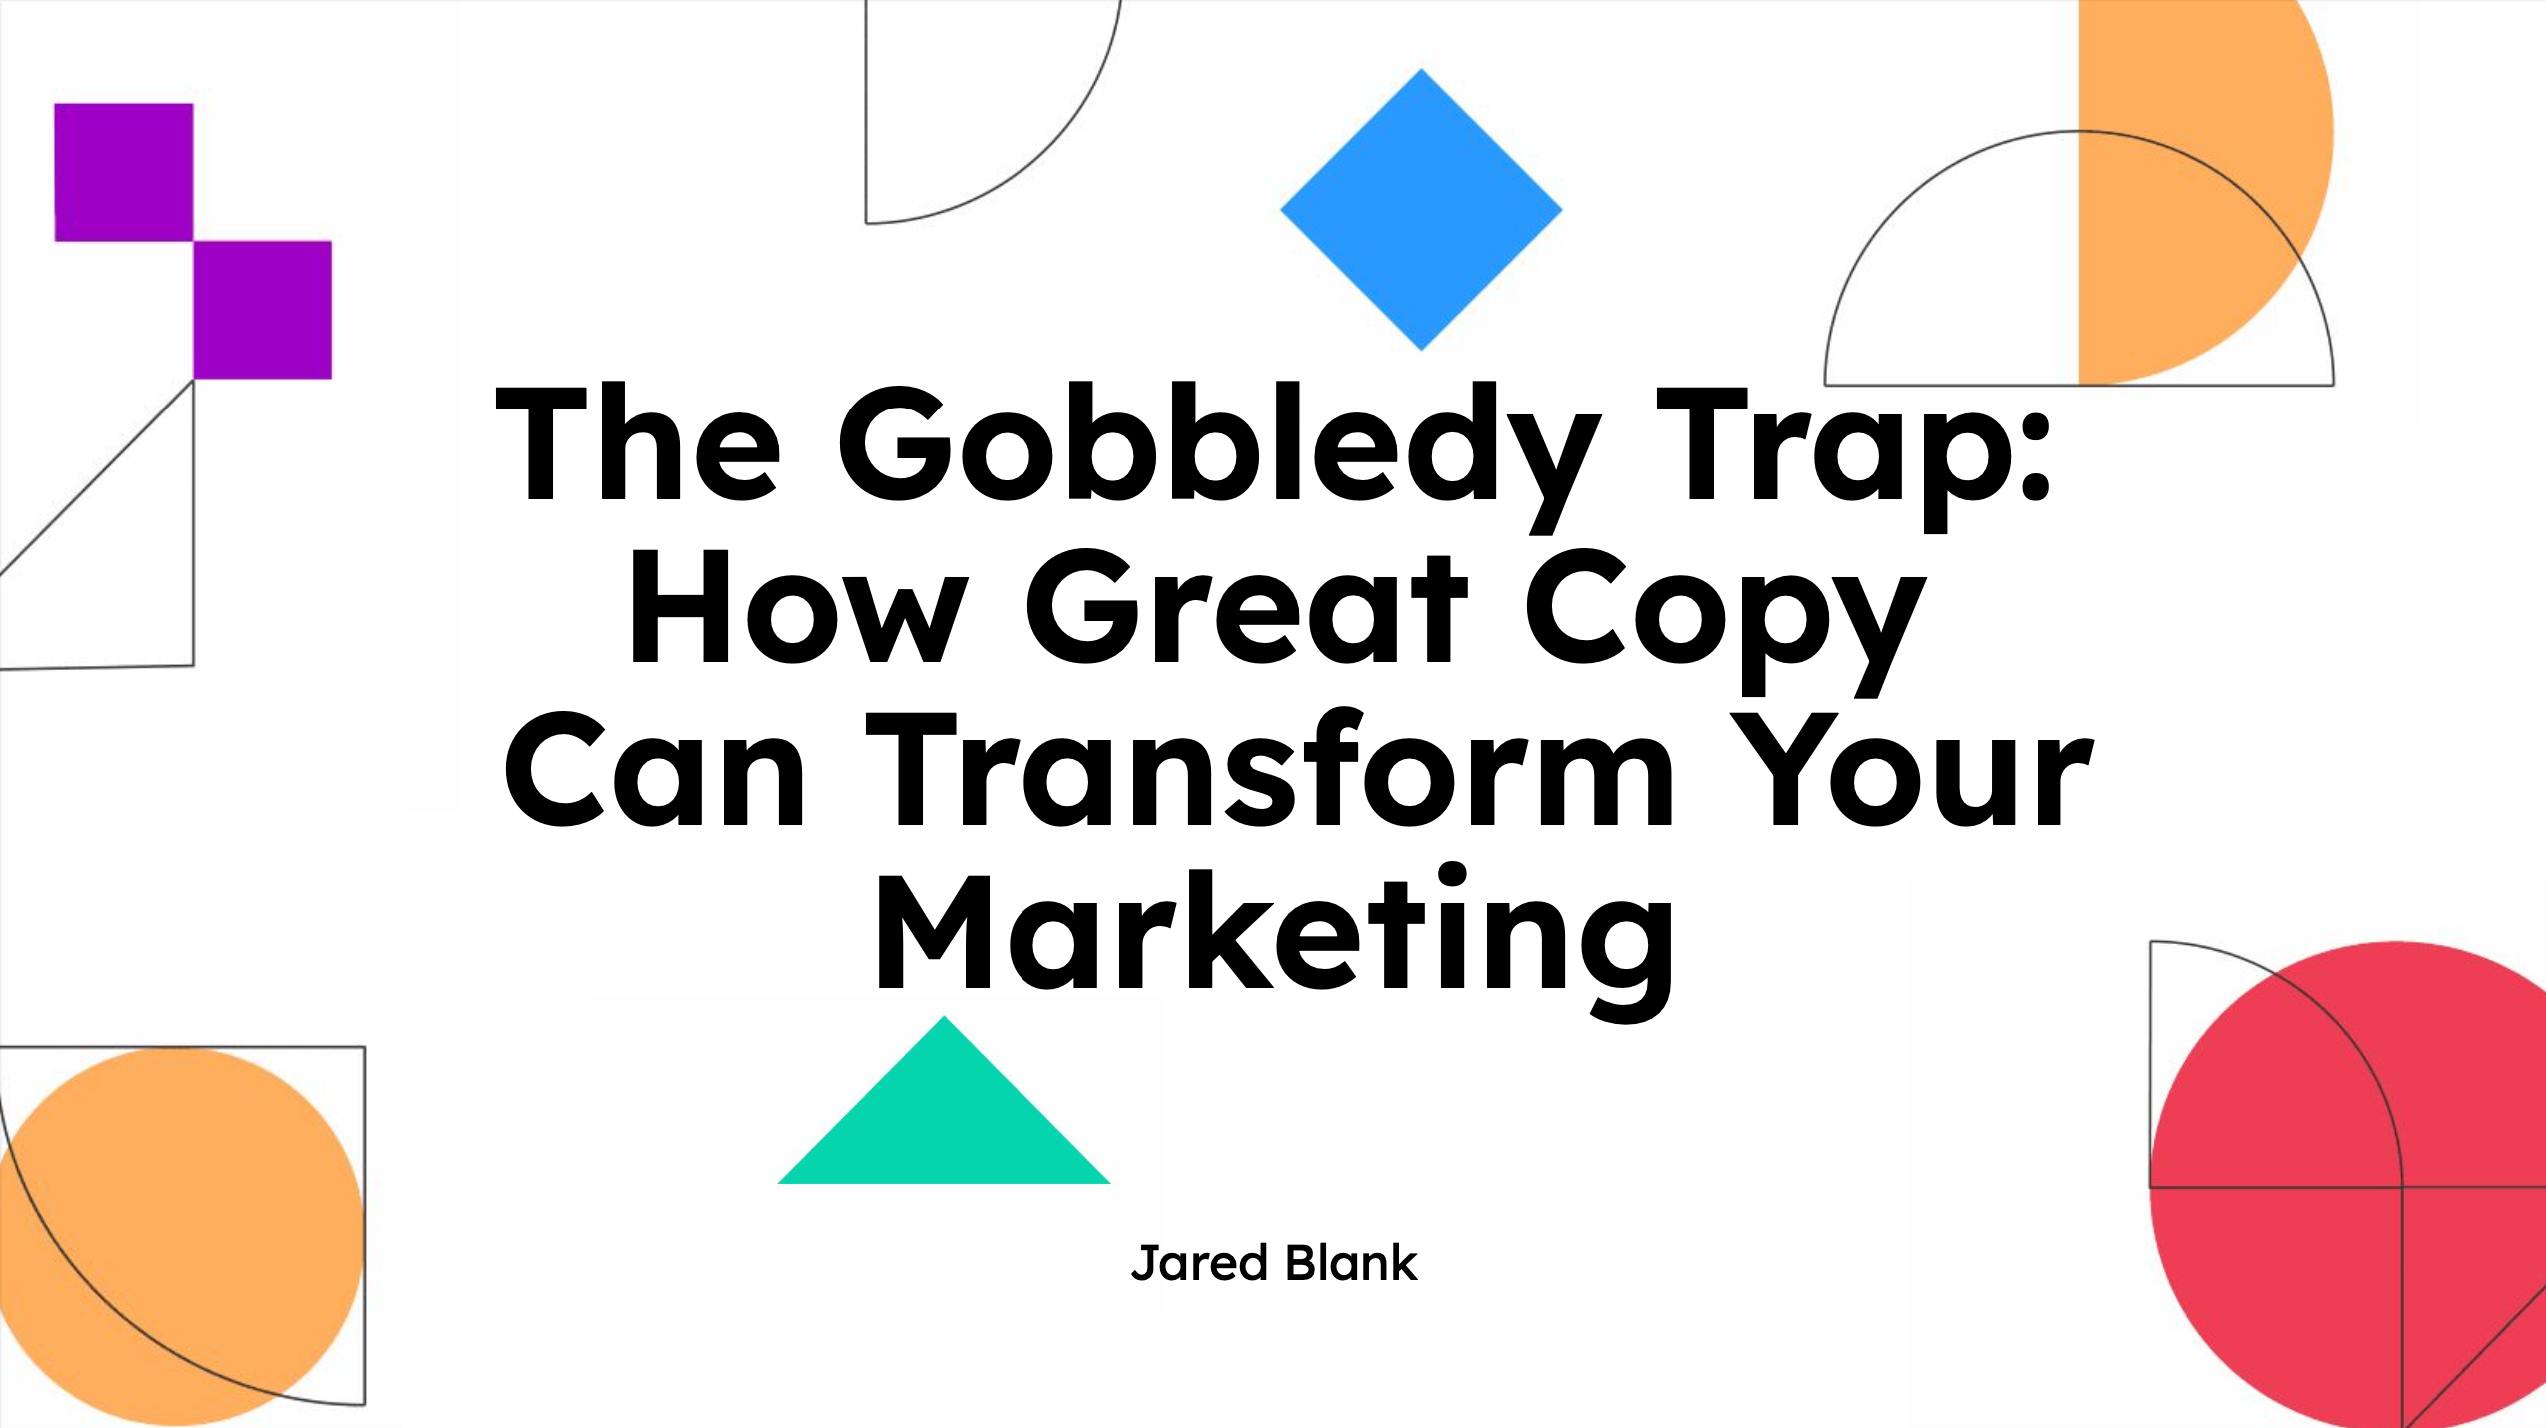 The Gobbledy Trap: How Great Copy Can Transform Your Marketing